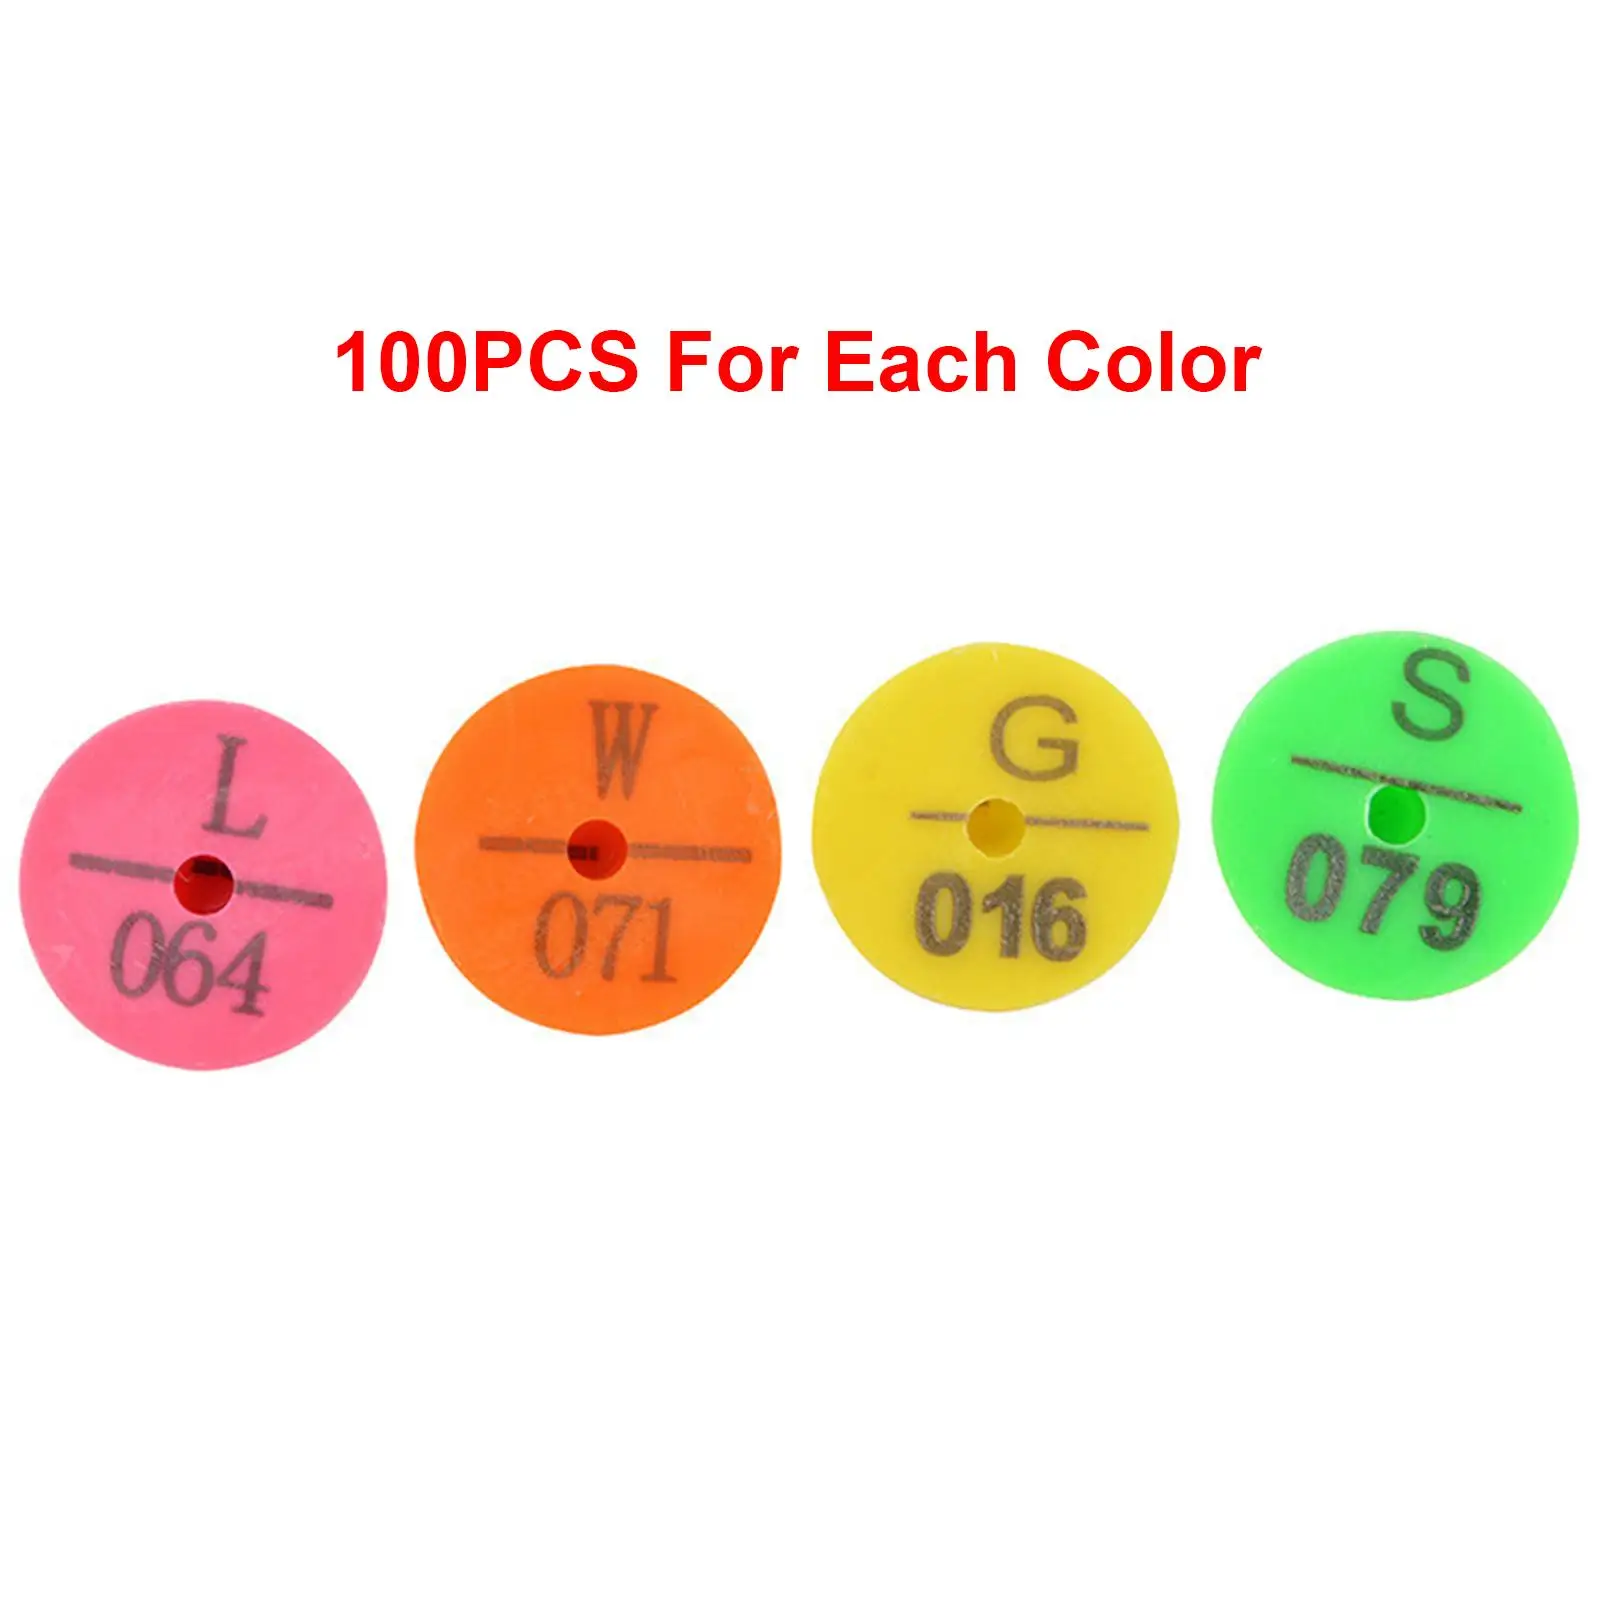 100PCS Animal Ear Tags Labels Durable for Rabbit Farm Animal Cattle Information Management